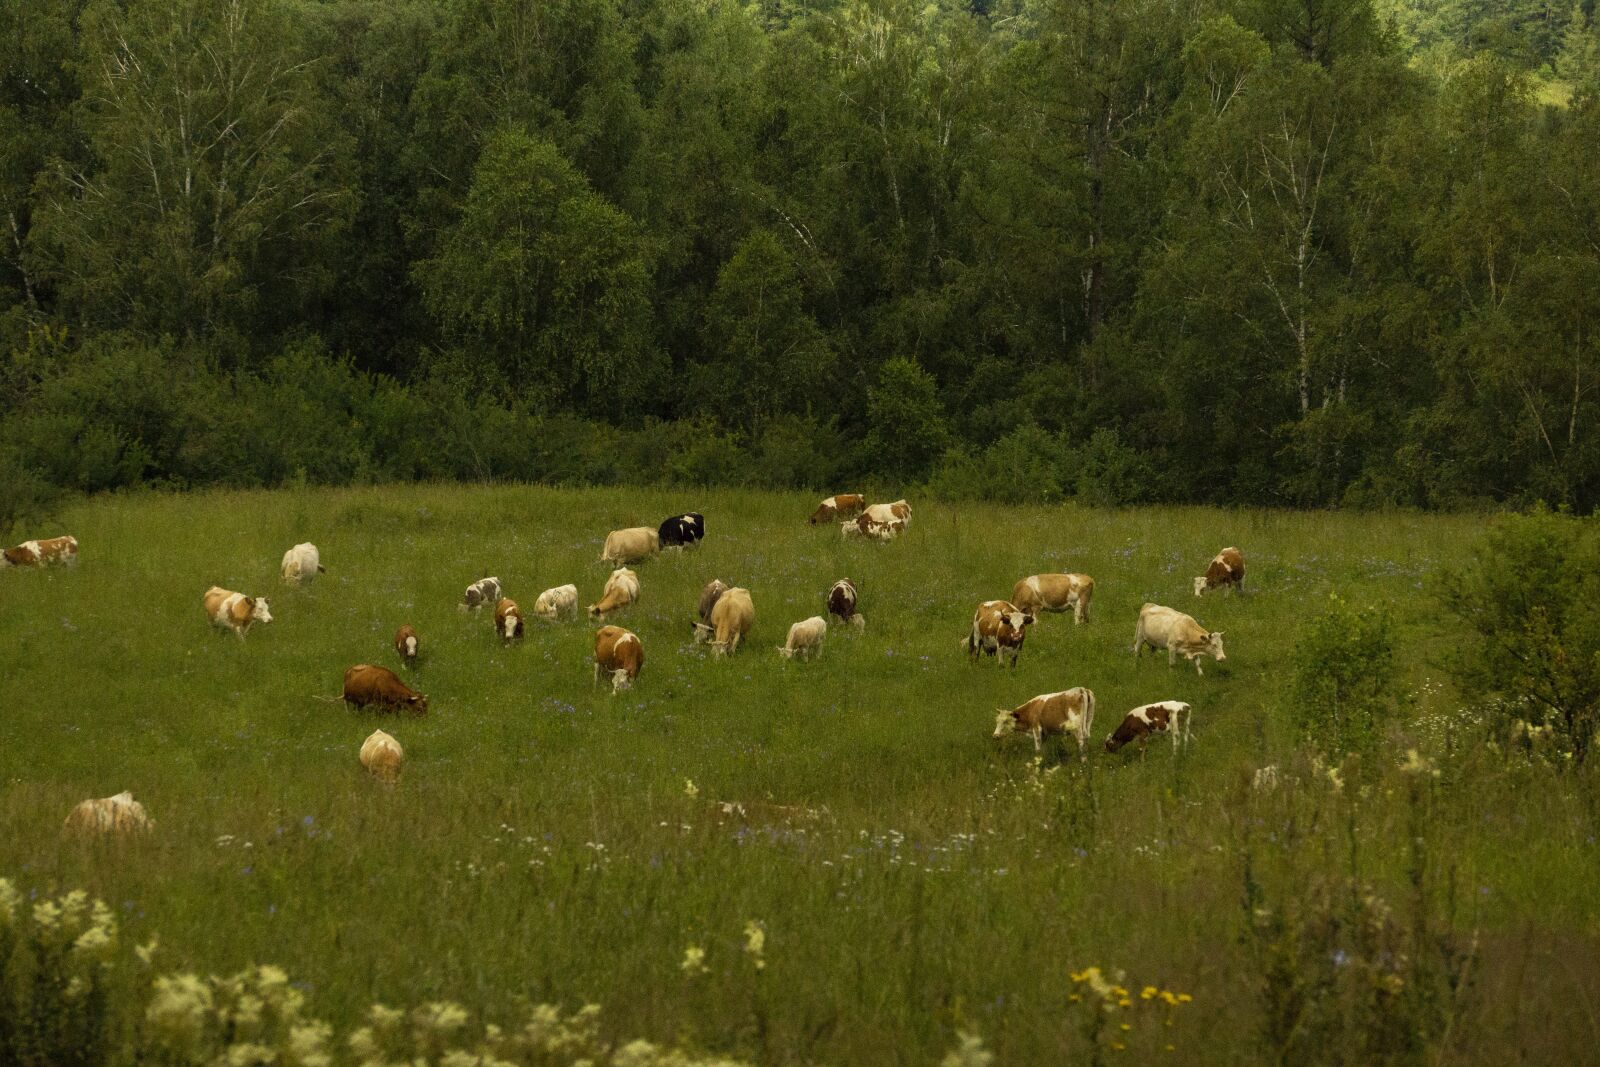 Sony SLT-A77 sample photo. Cows, summer, nature photography